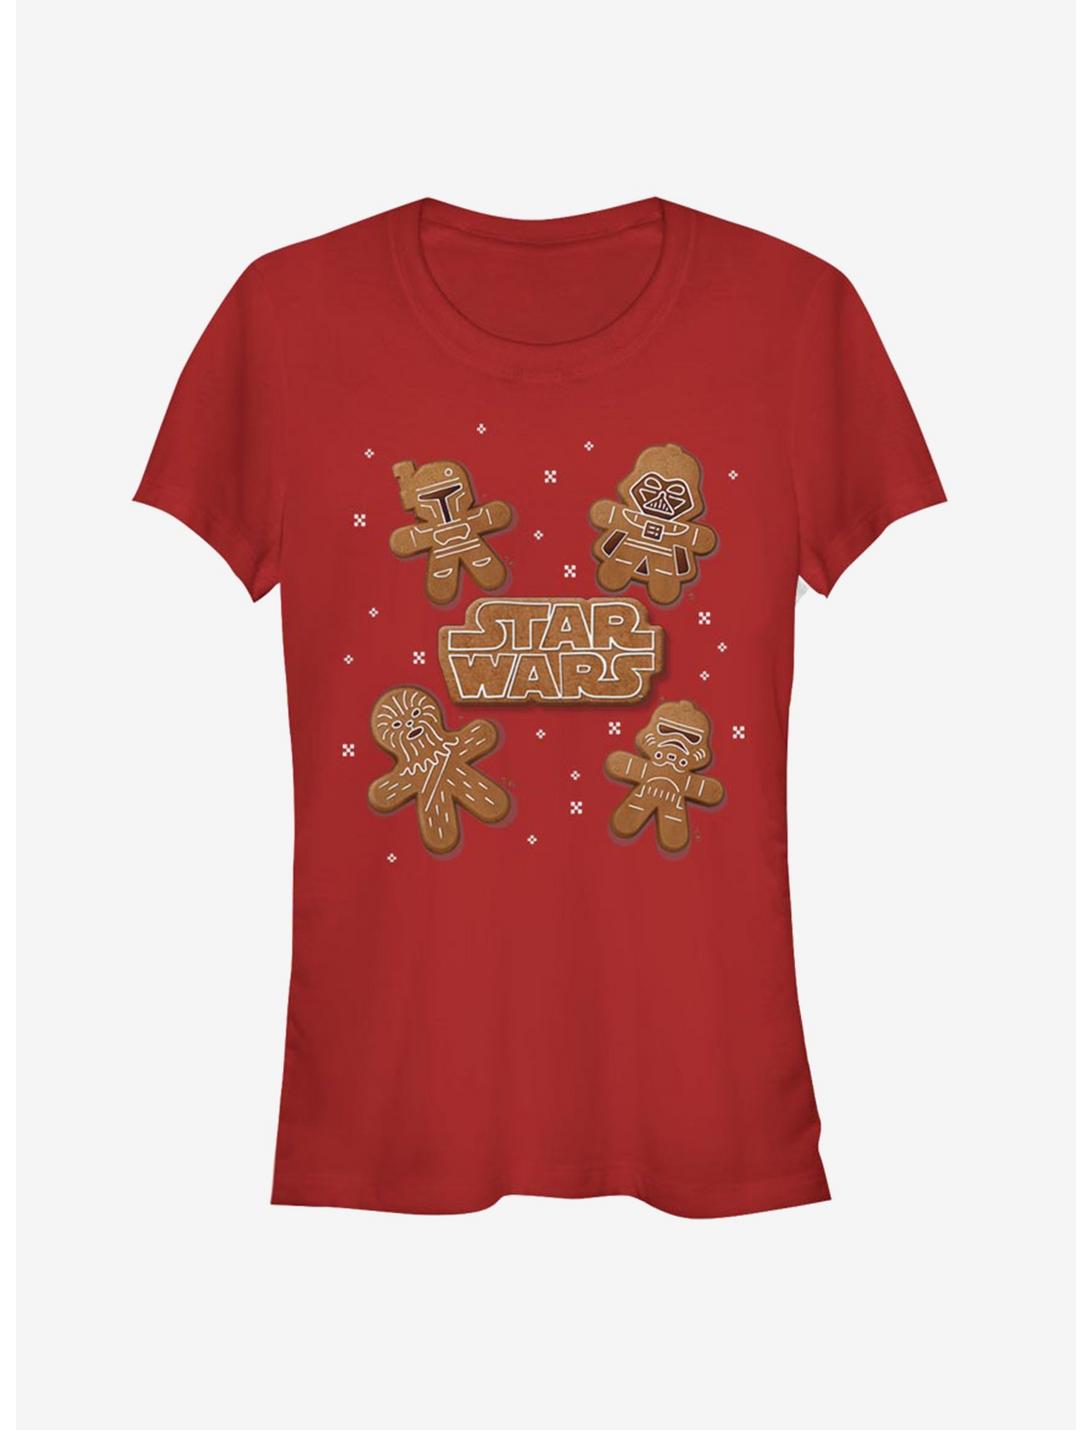 Star Wars Gingerbread Cookie Girls T-Shirt, RED, hi-res